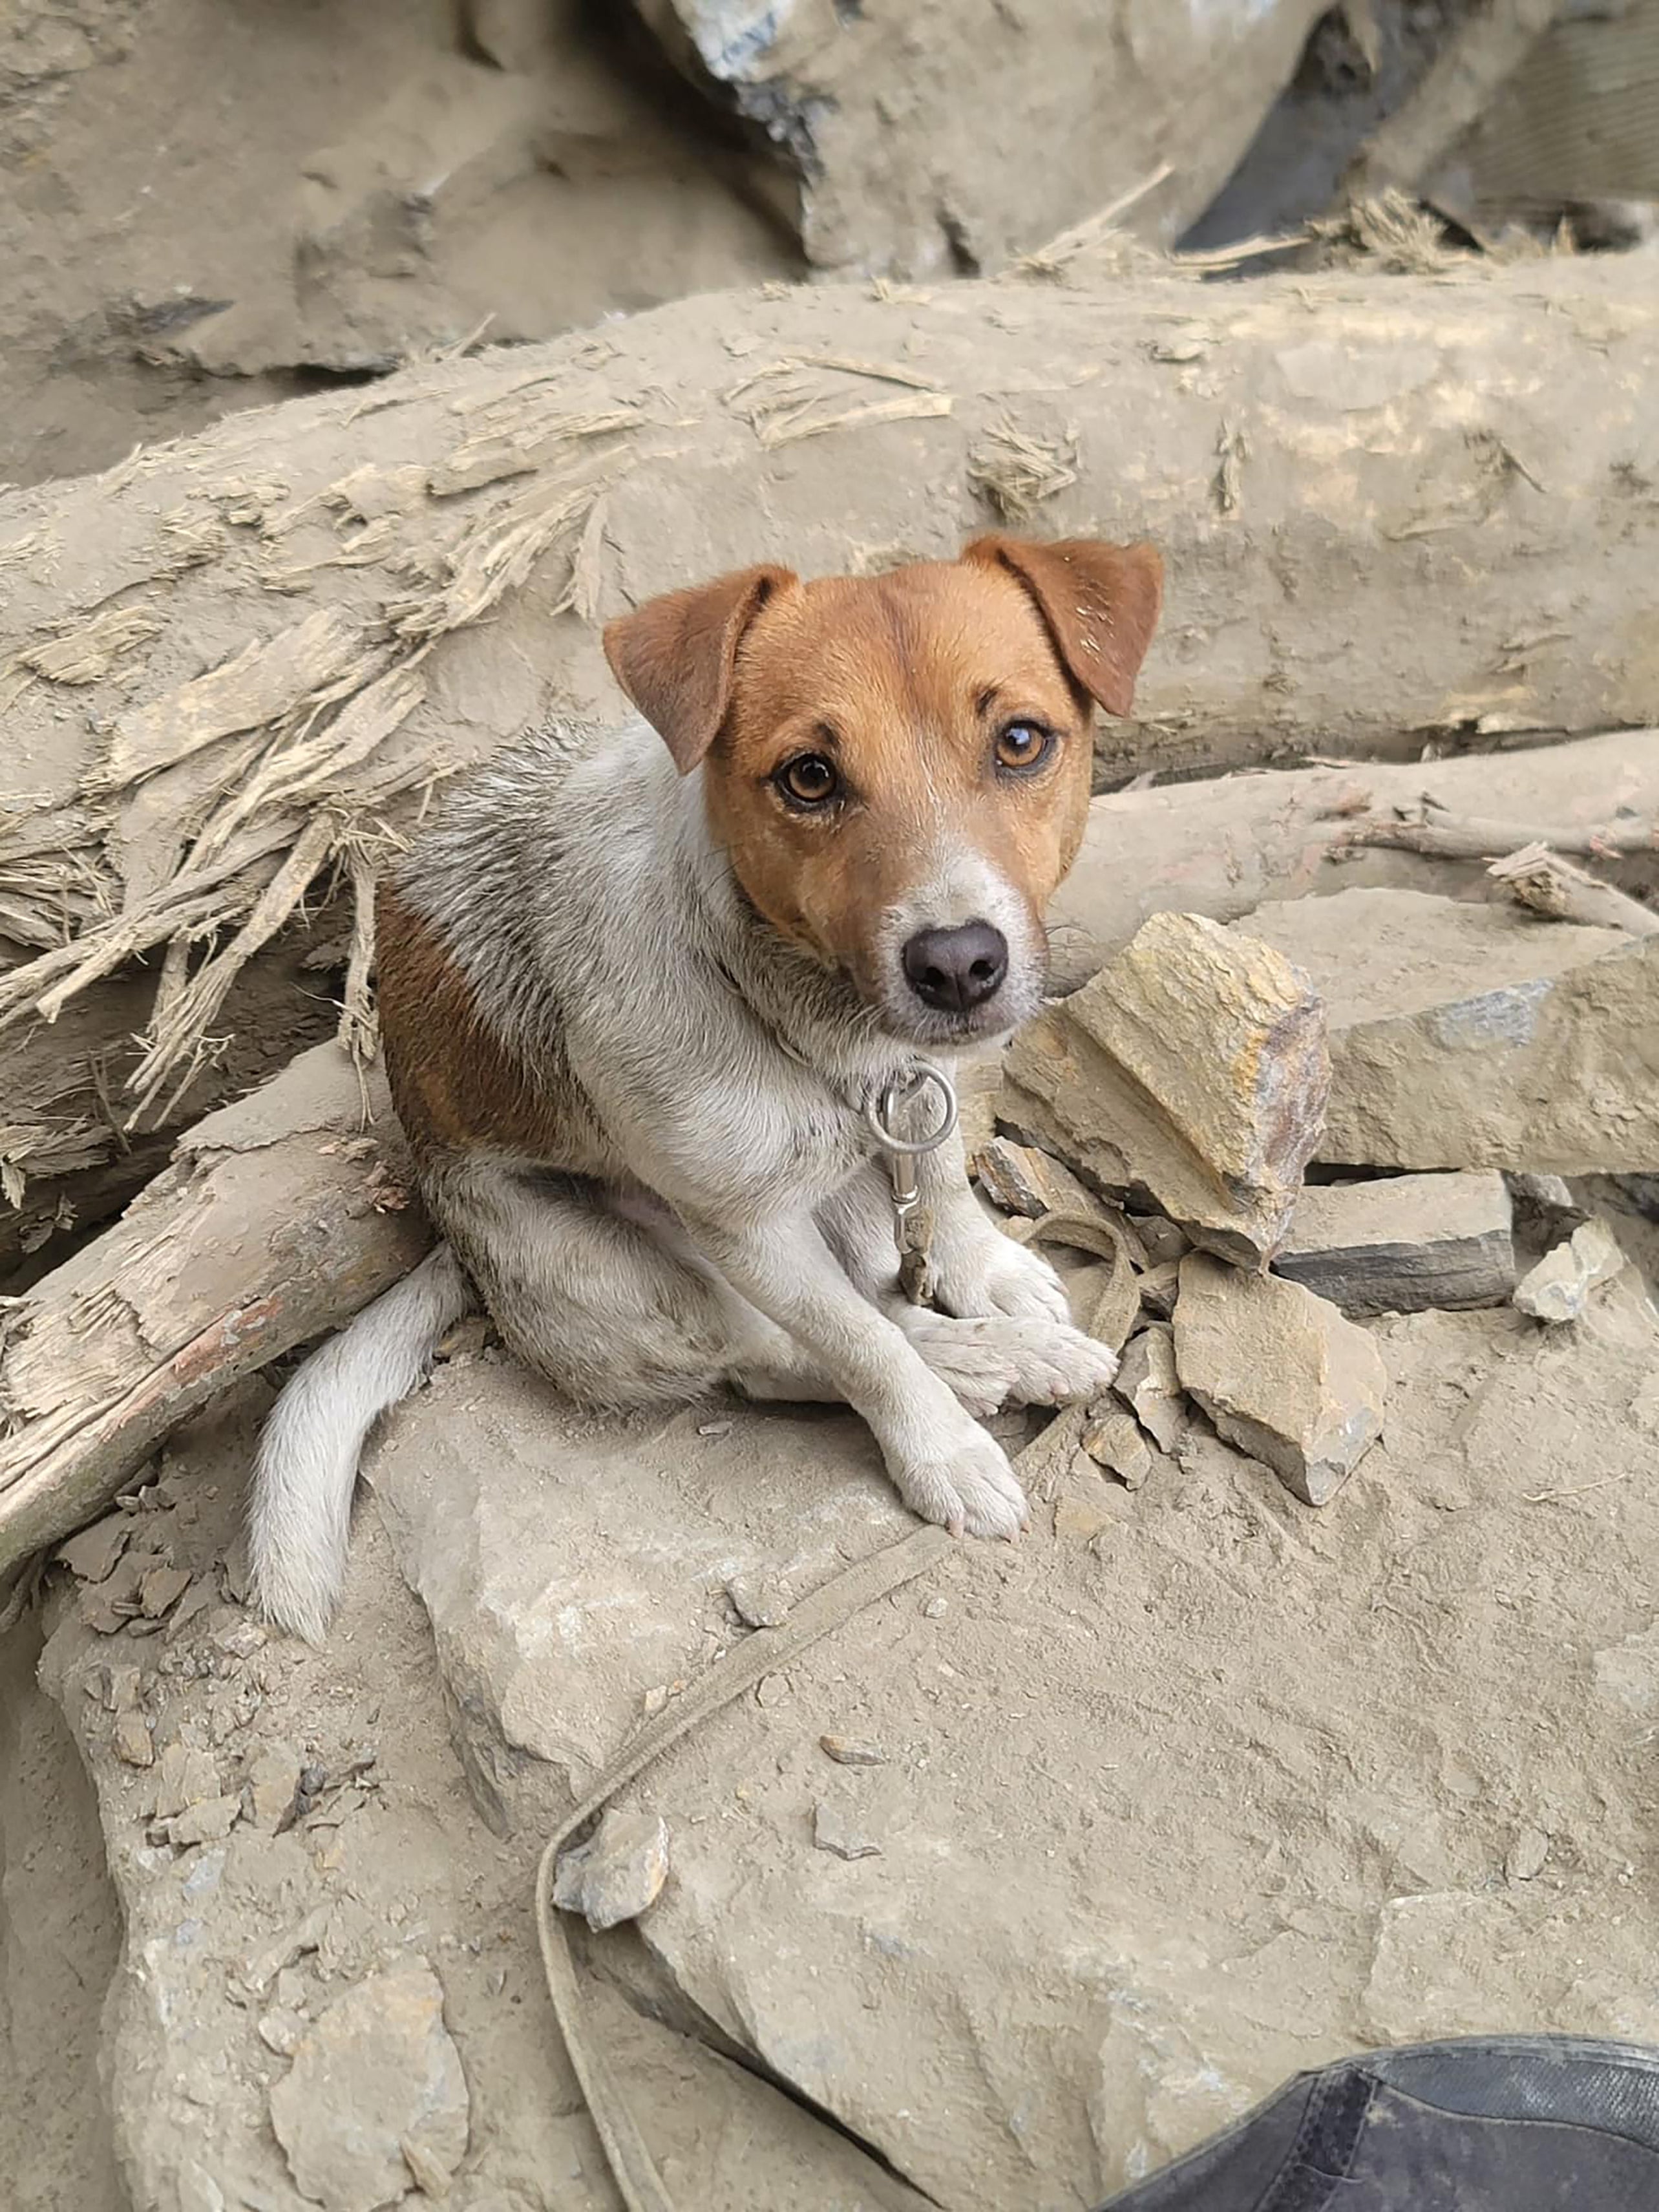 Wilson, a Jack Russell terrier, helping rescuers locate victims of an earthquake in Taiwan’s Taroko National Park in Hualien